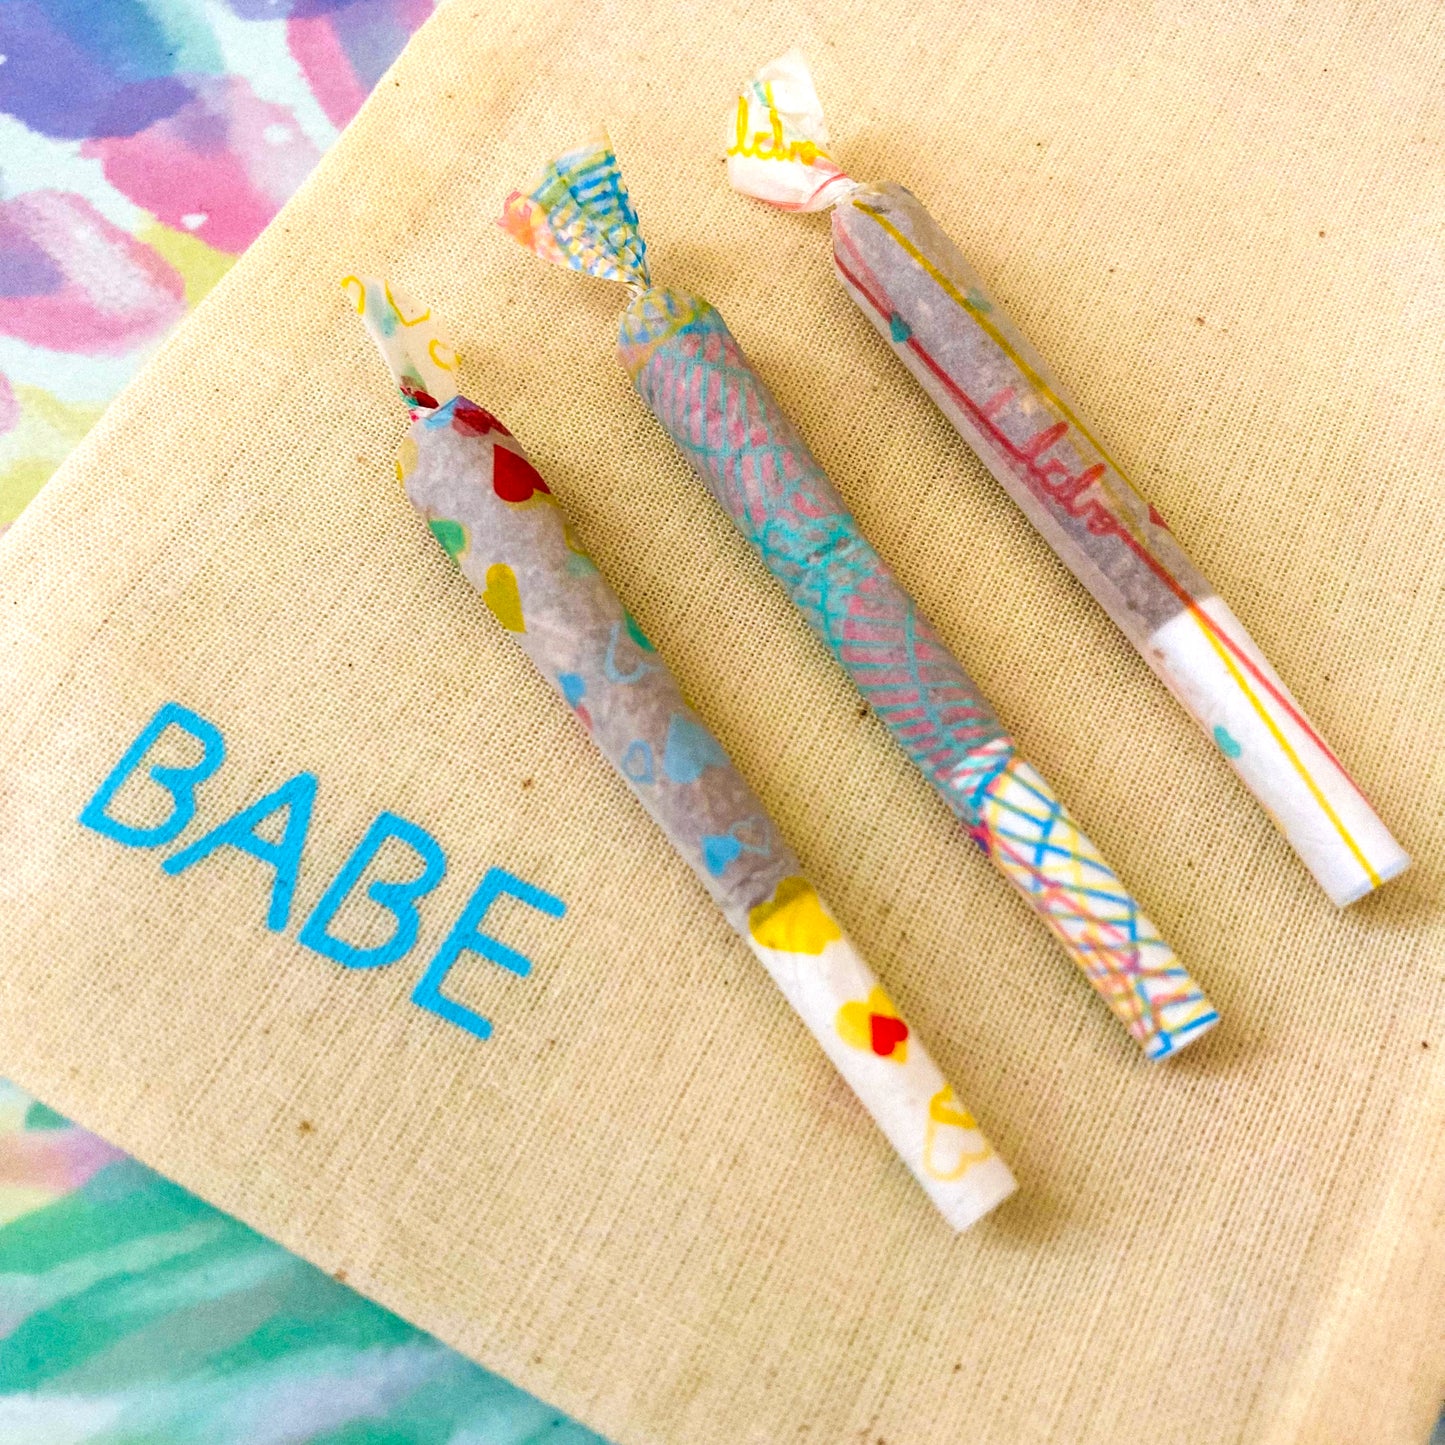 Set of 3 heart themed papers. These designer rolling papers are girly, pretty, vegan, cute, cool, standard size, high quality, even burn, natural dyes, best tasting, slow burn.